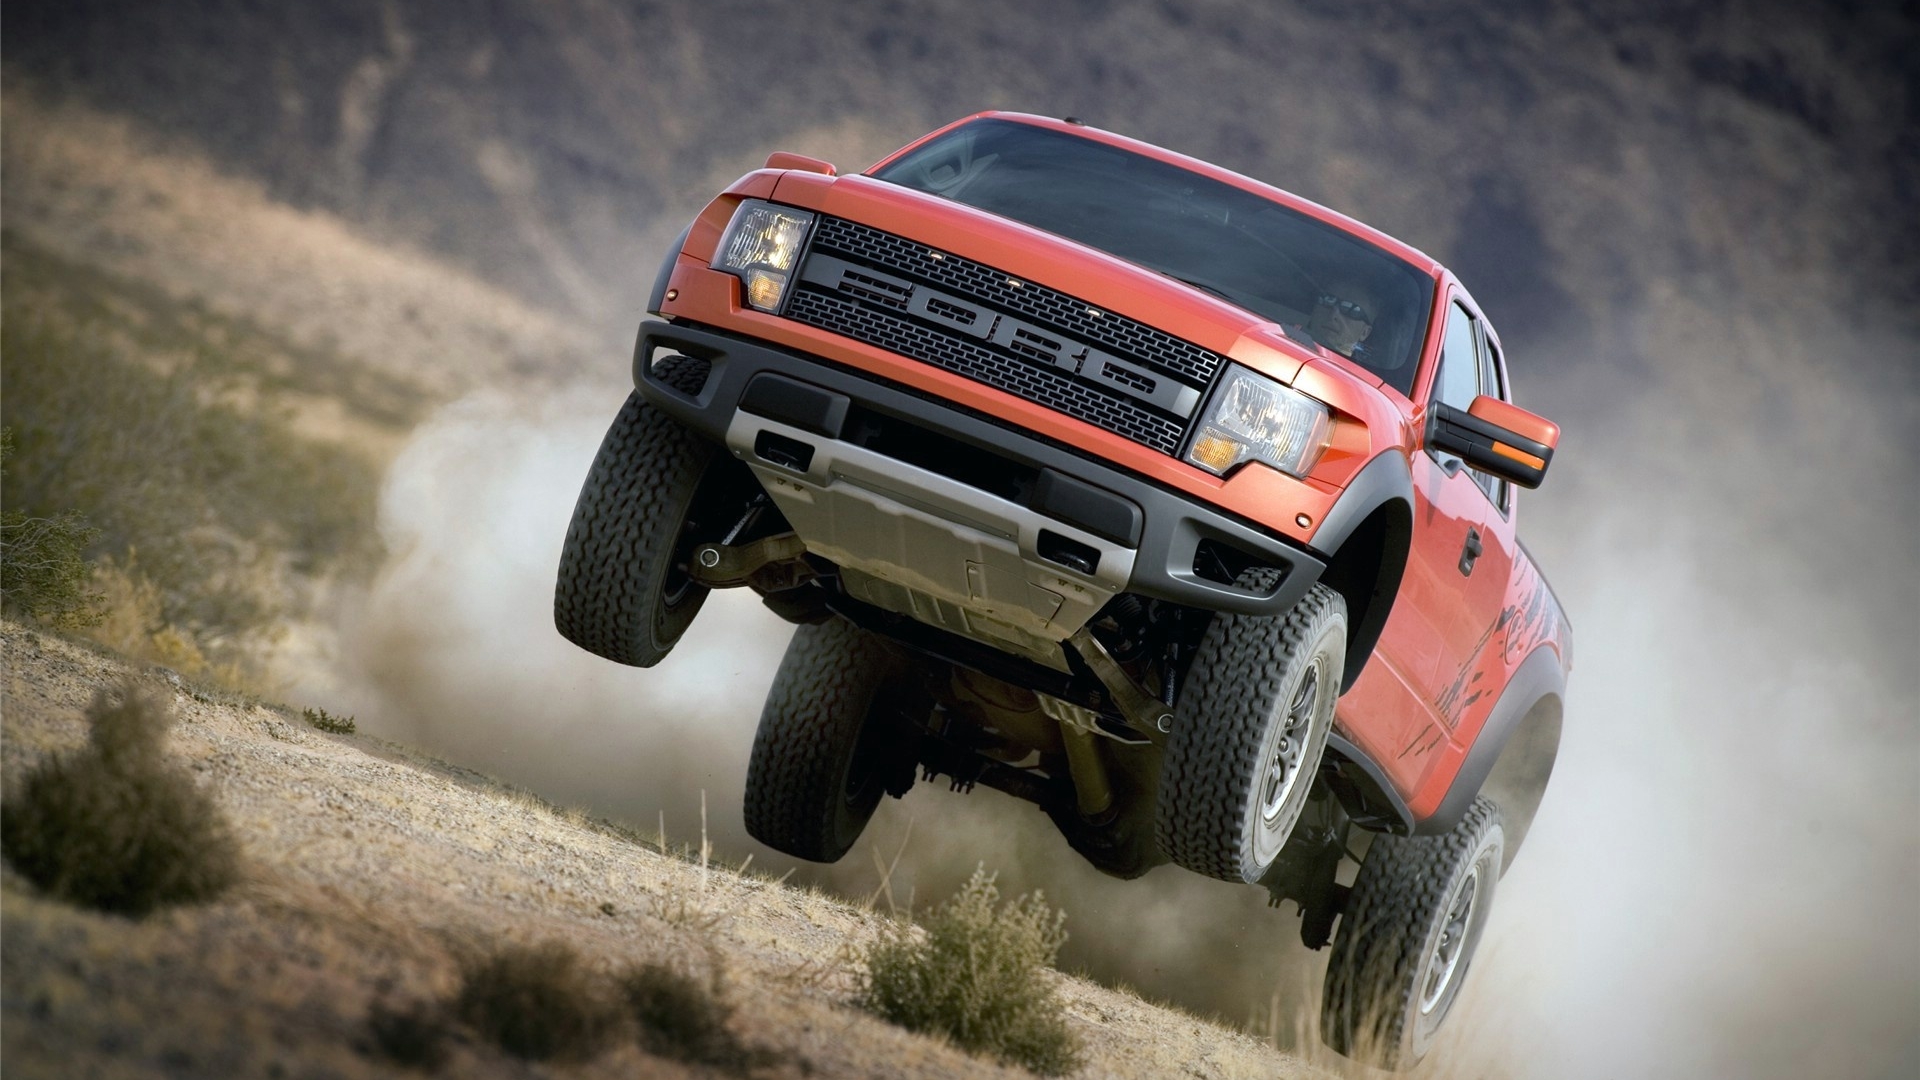 Free download wallpaper Ford, Vehicles on your PC desktop